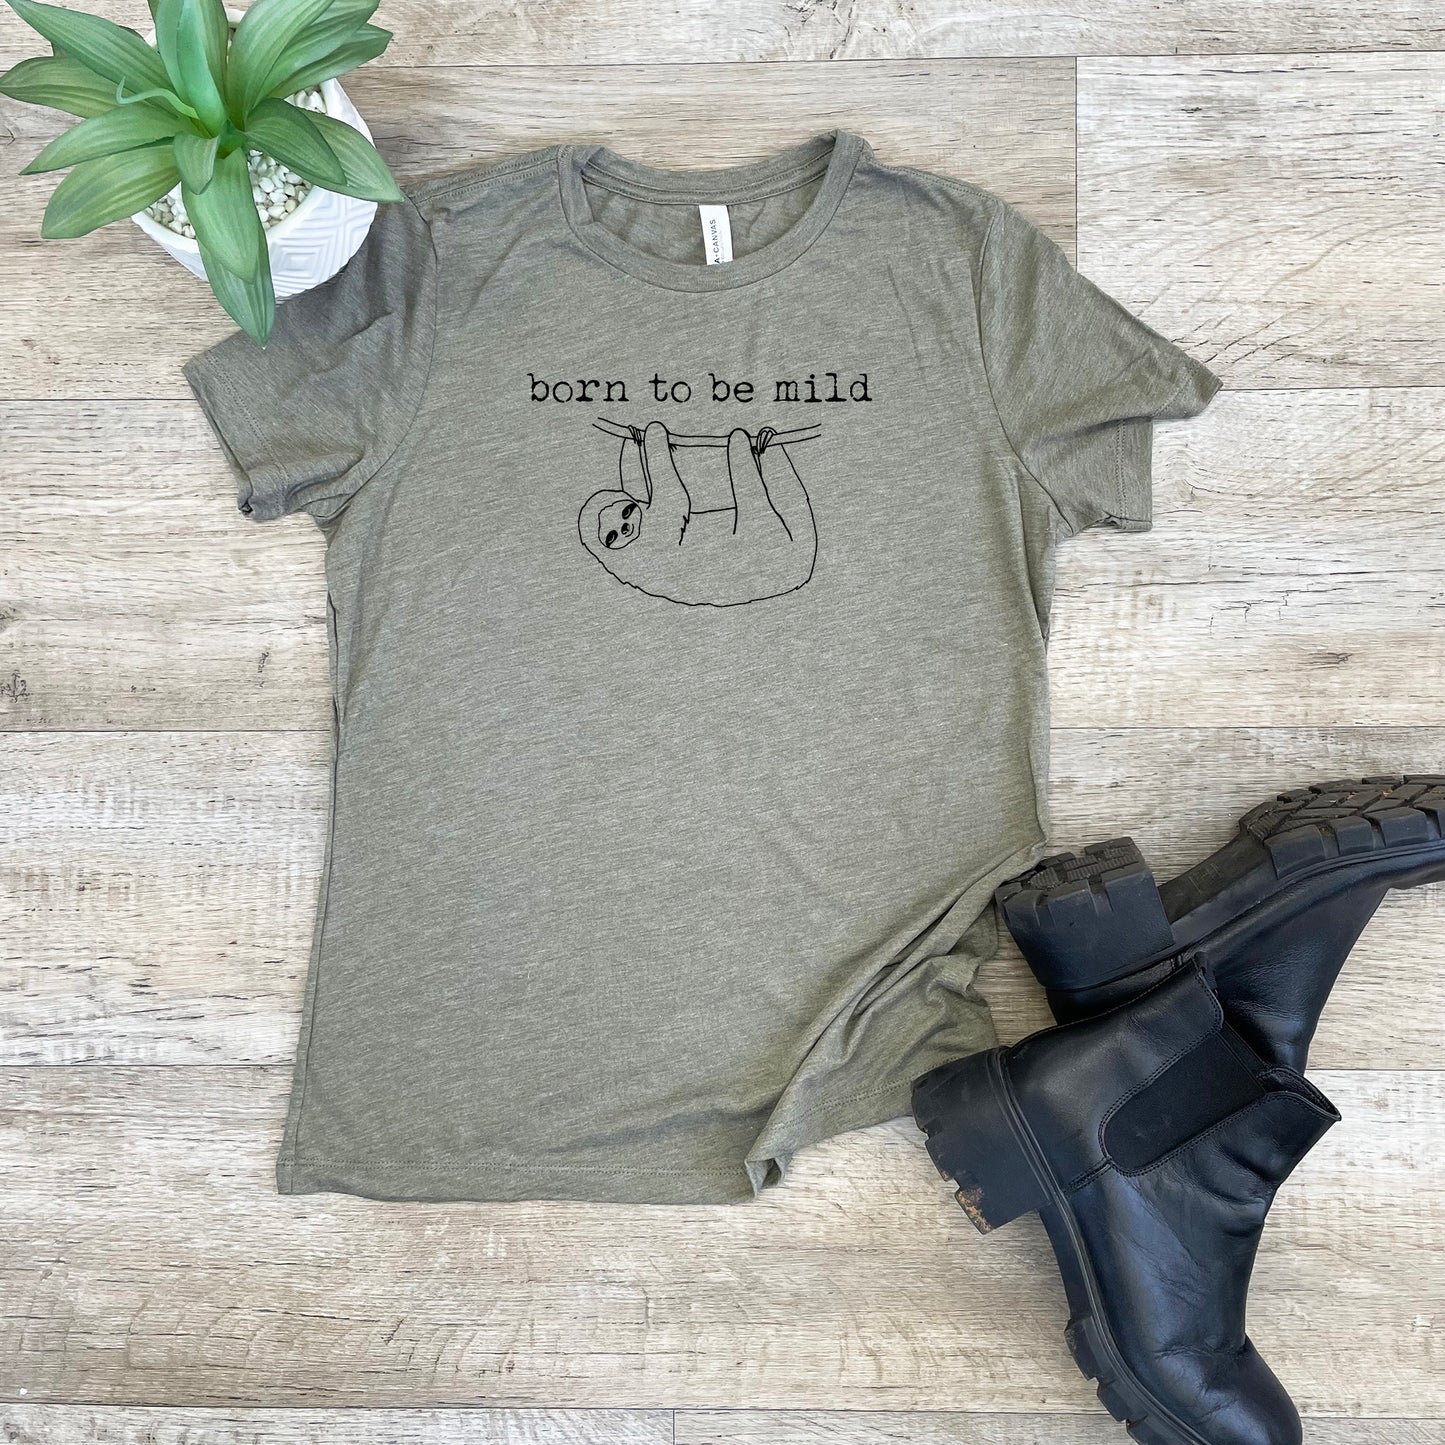 Born To Be Mild (Sloth) - Women's Crew Tee - Olive or Dusty Blue